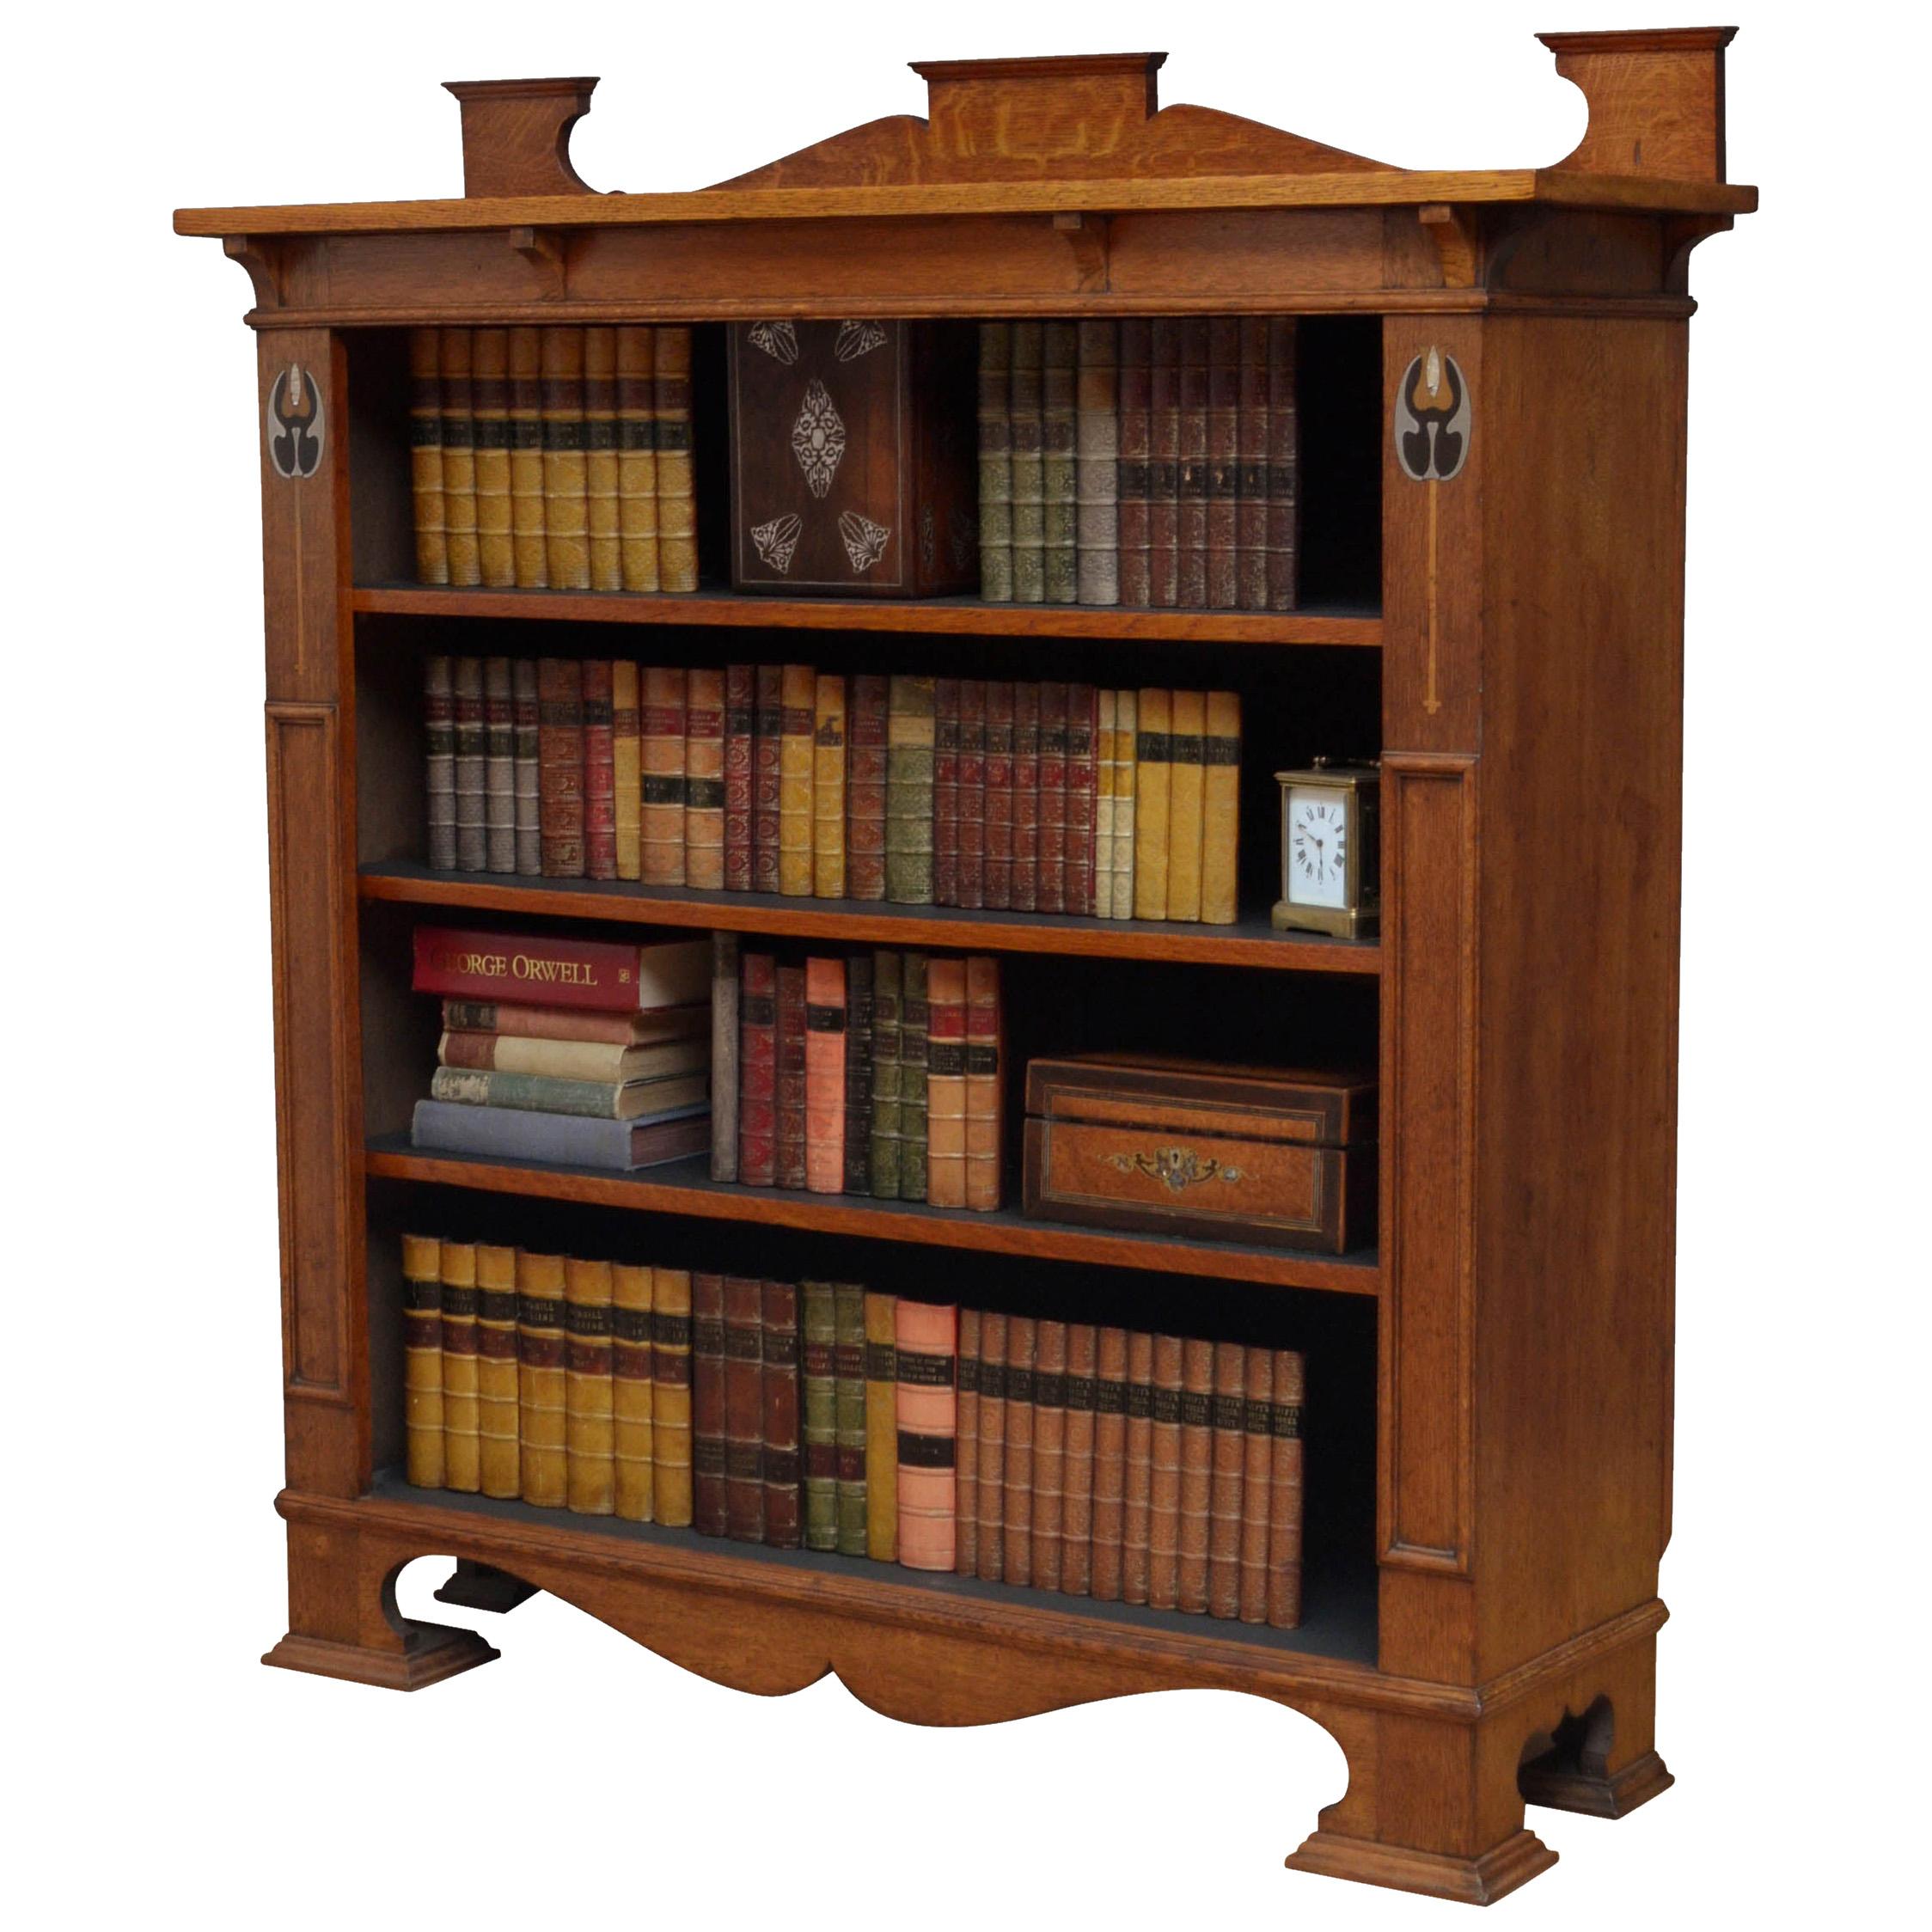 Stylish Arts & Crafts Open Bookcase in Solid Oak